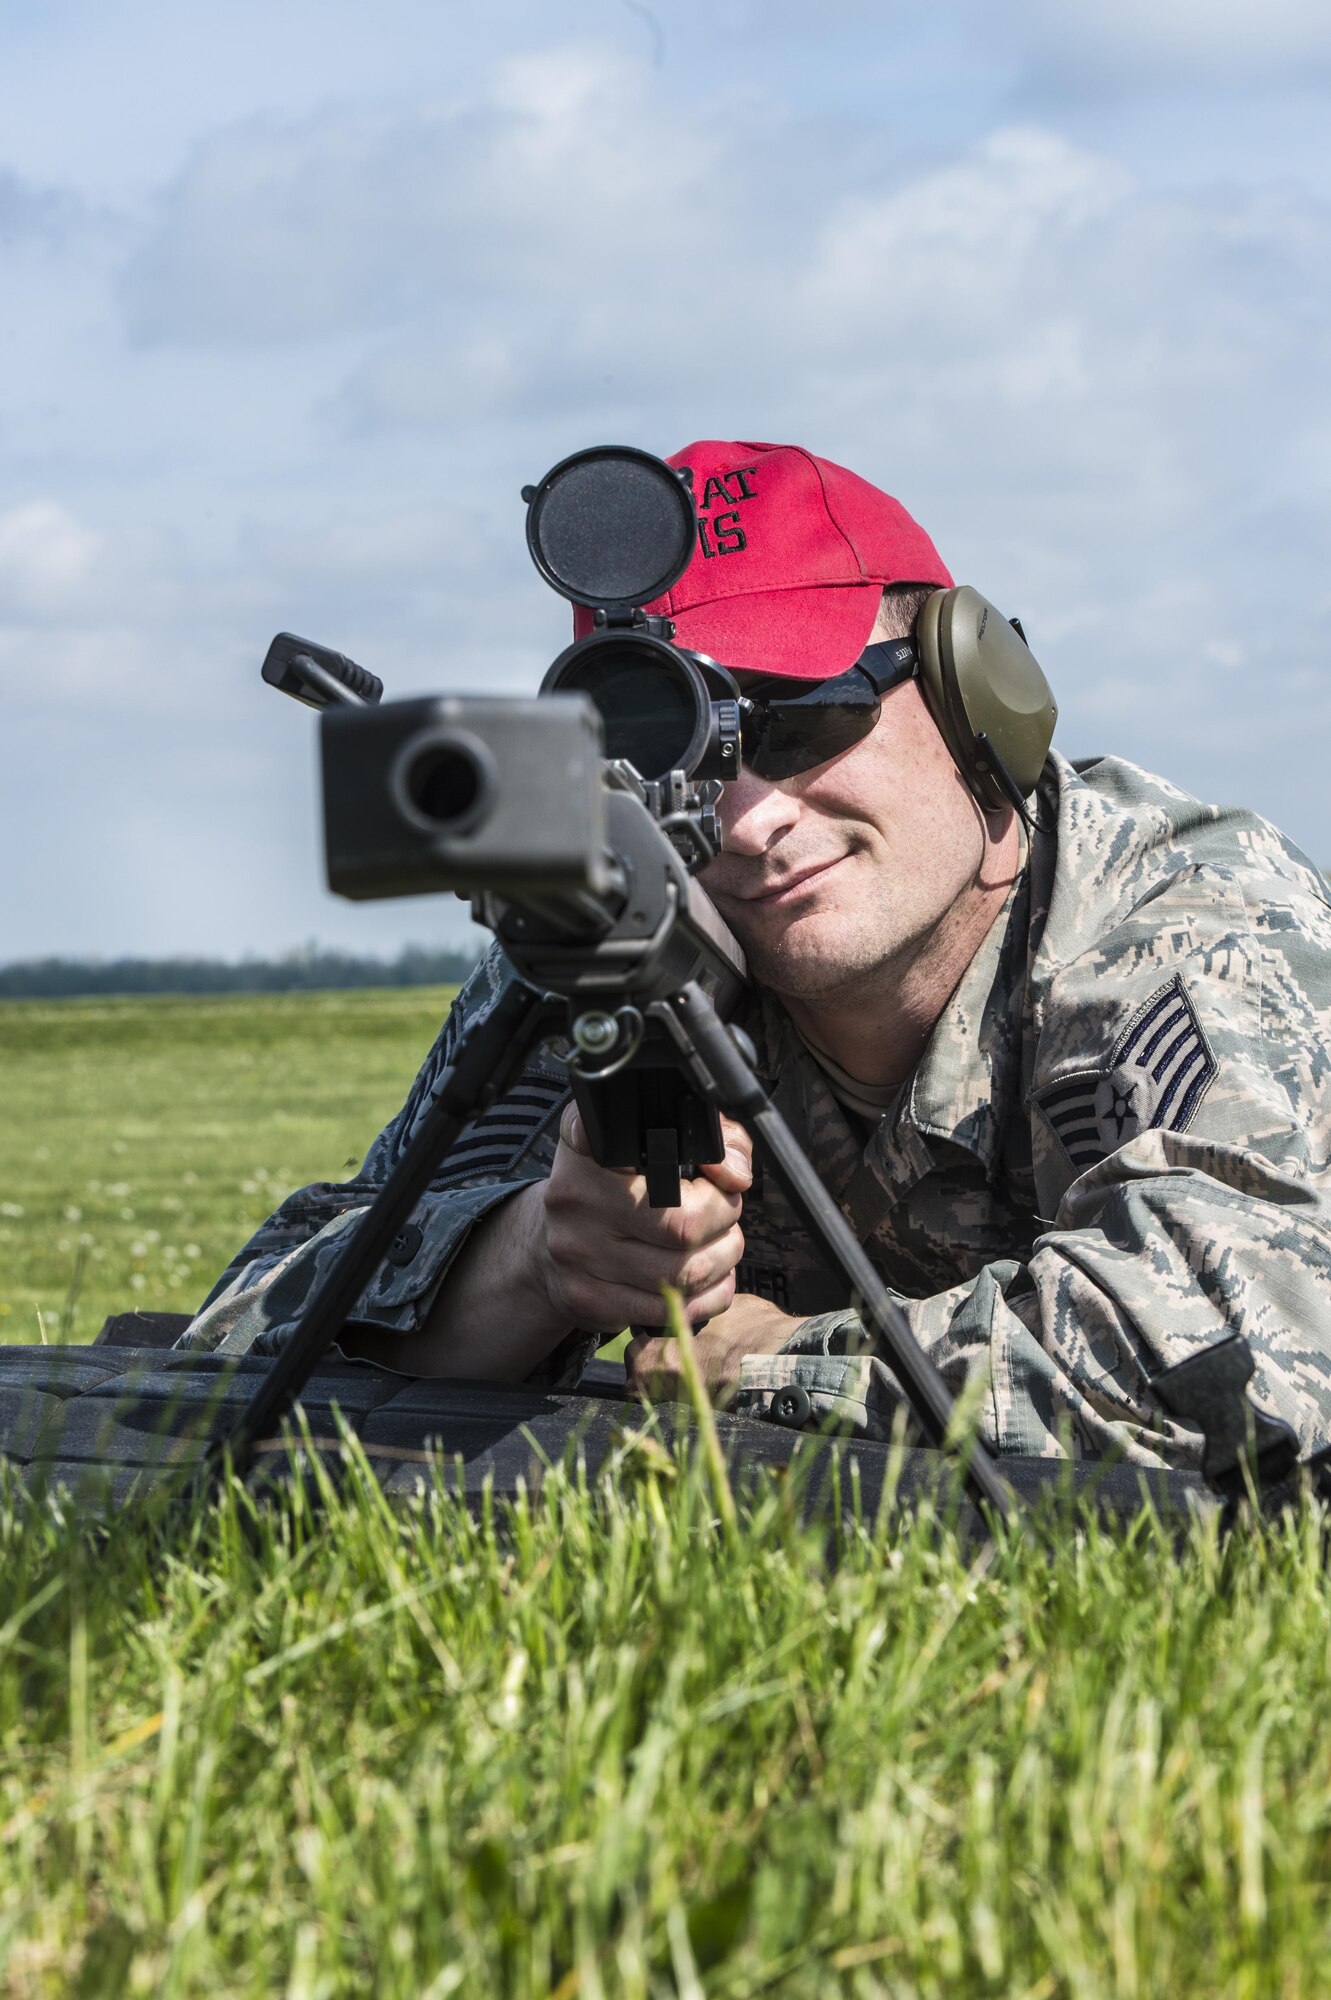 Tech. Sgt. Aaron Fisher, 934th Security Forces Squadron combat arms instructor, poses for a photograph  at Camp Atterbury-Muscatatuck, Ind., April 19, 2017. The 934th SFS from Minneapolis-St. Paul Air Reserve Station joined Grissom Airmen to conduct joint weapons training as part of their annual qualifications. (U.S. Air Force photo/Senior Airman Harrison Withrow)
